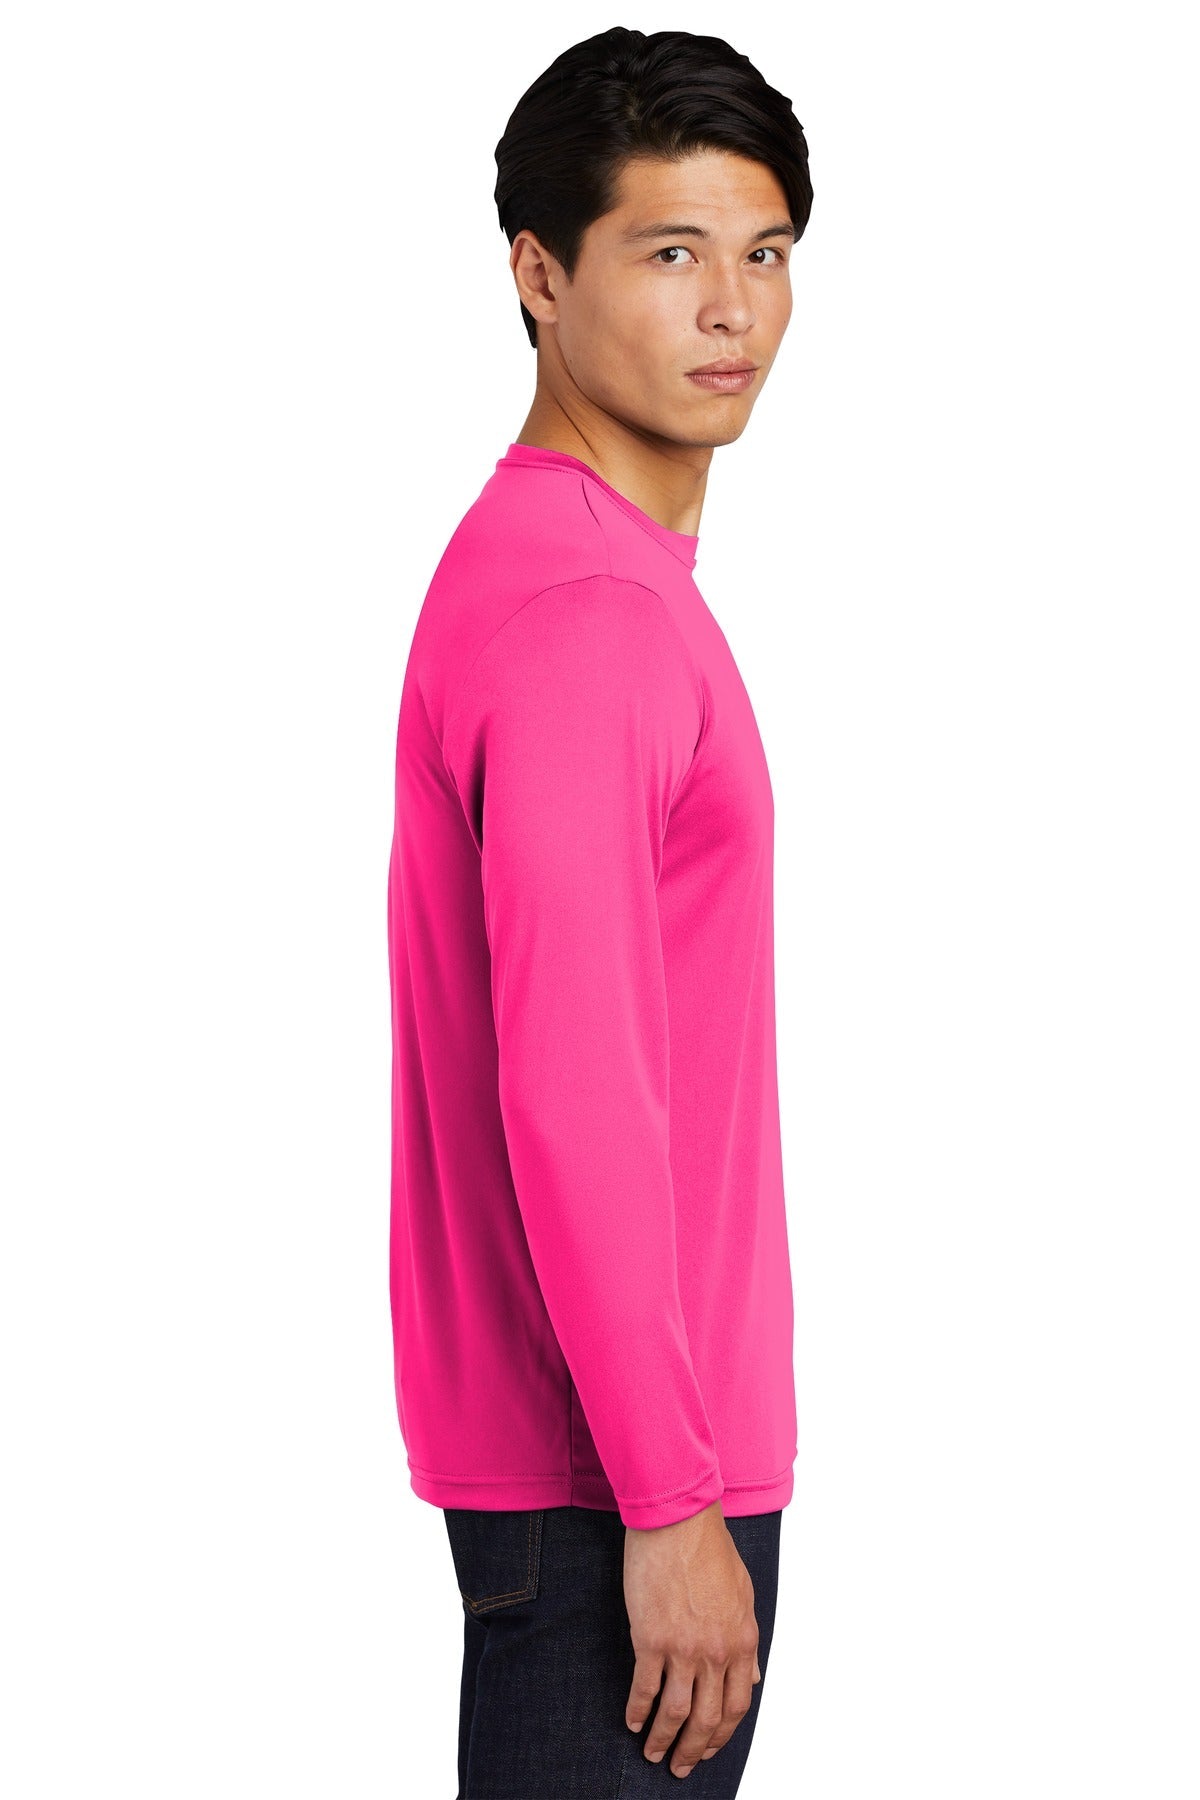 Sport-Tek® Long Sleeve PosiCharge® Competitor™ Tee. ST350LS [Neon Pink] - DFW Impression